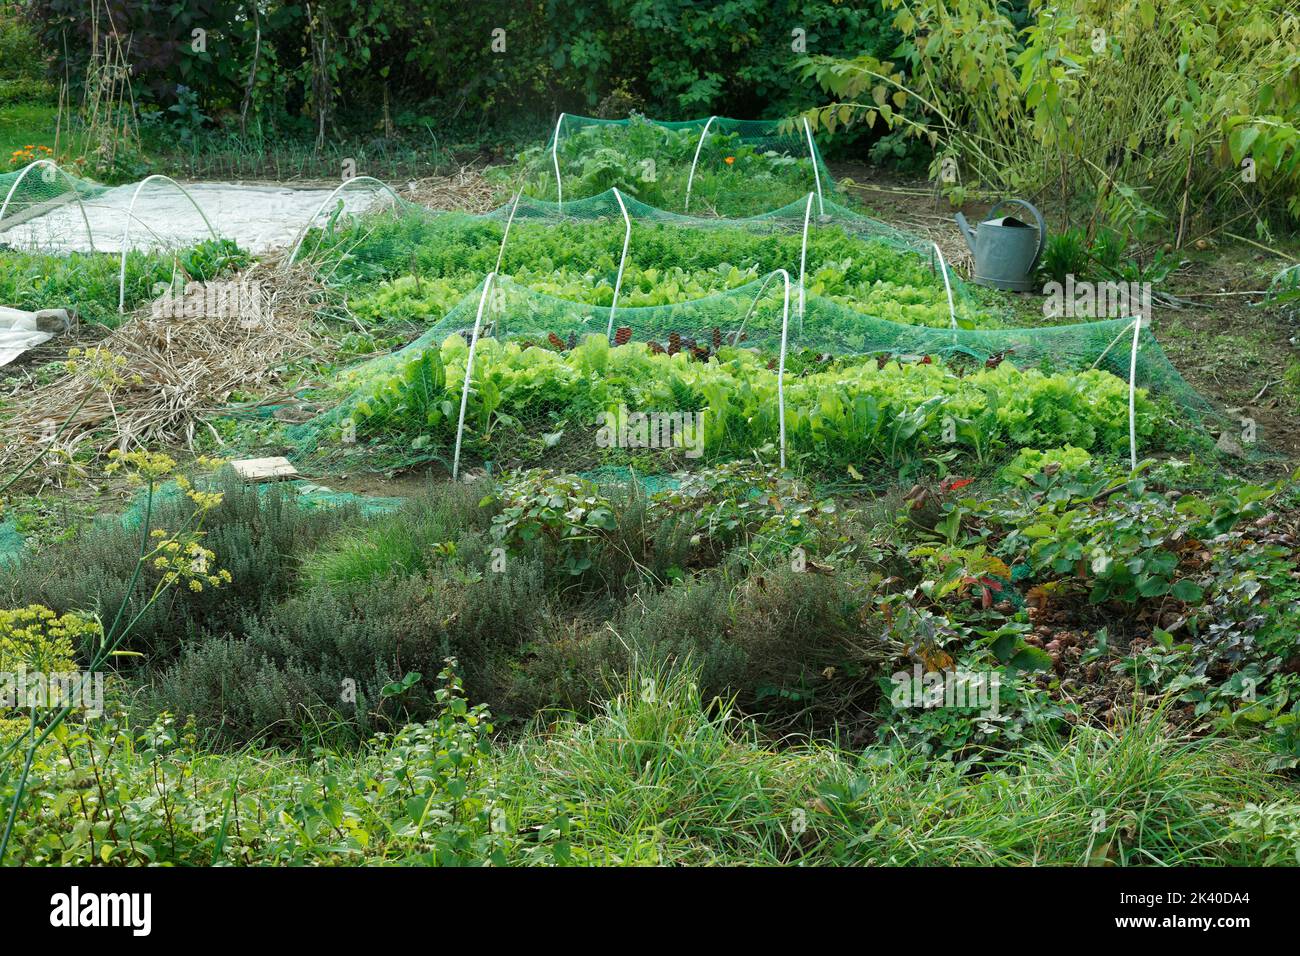 Traditional vegetable in october, vegetable beds protected from birds with nets Stock Photo